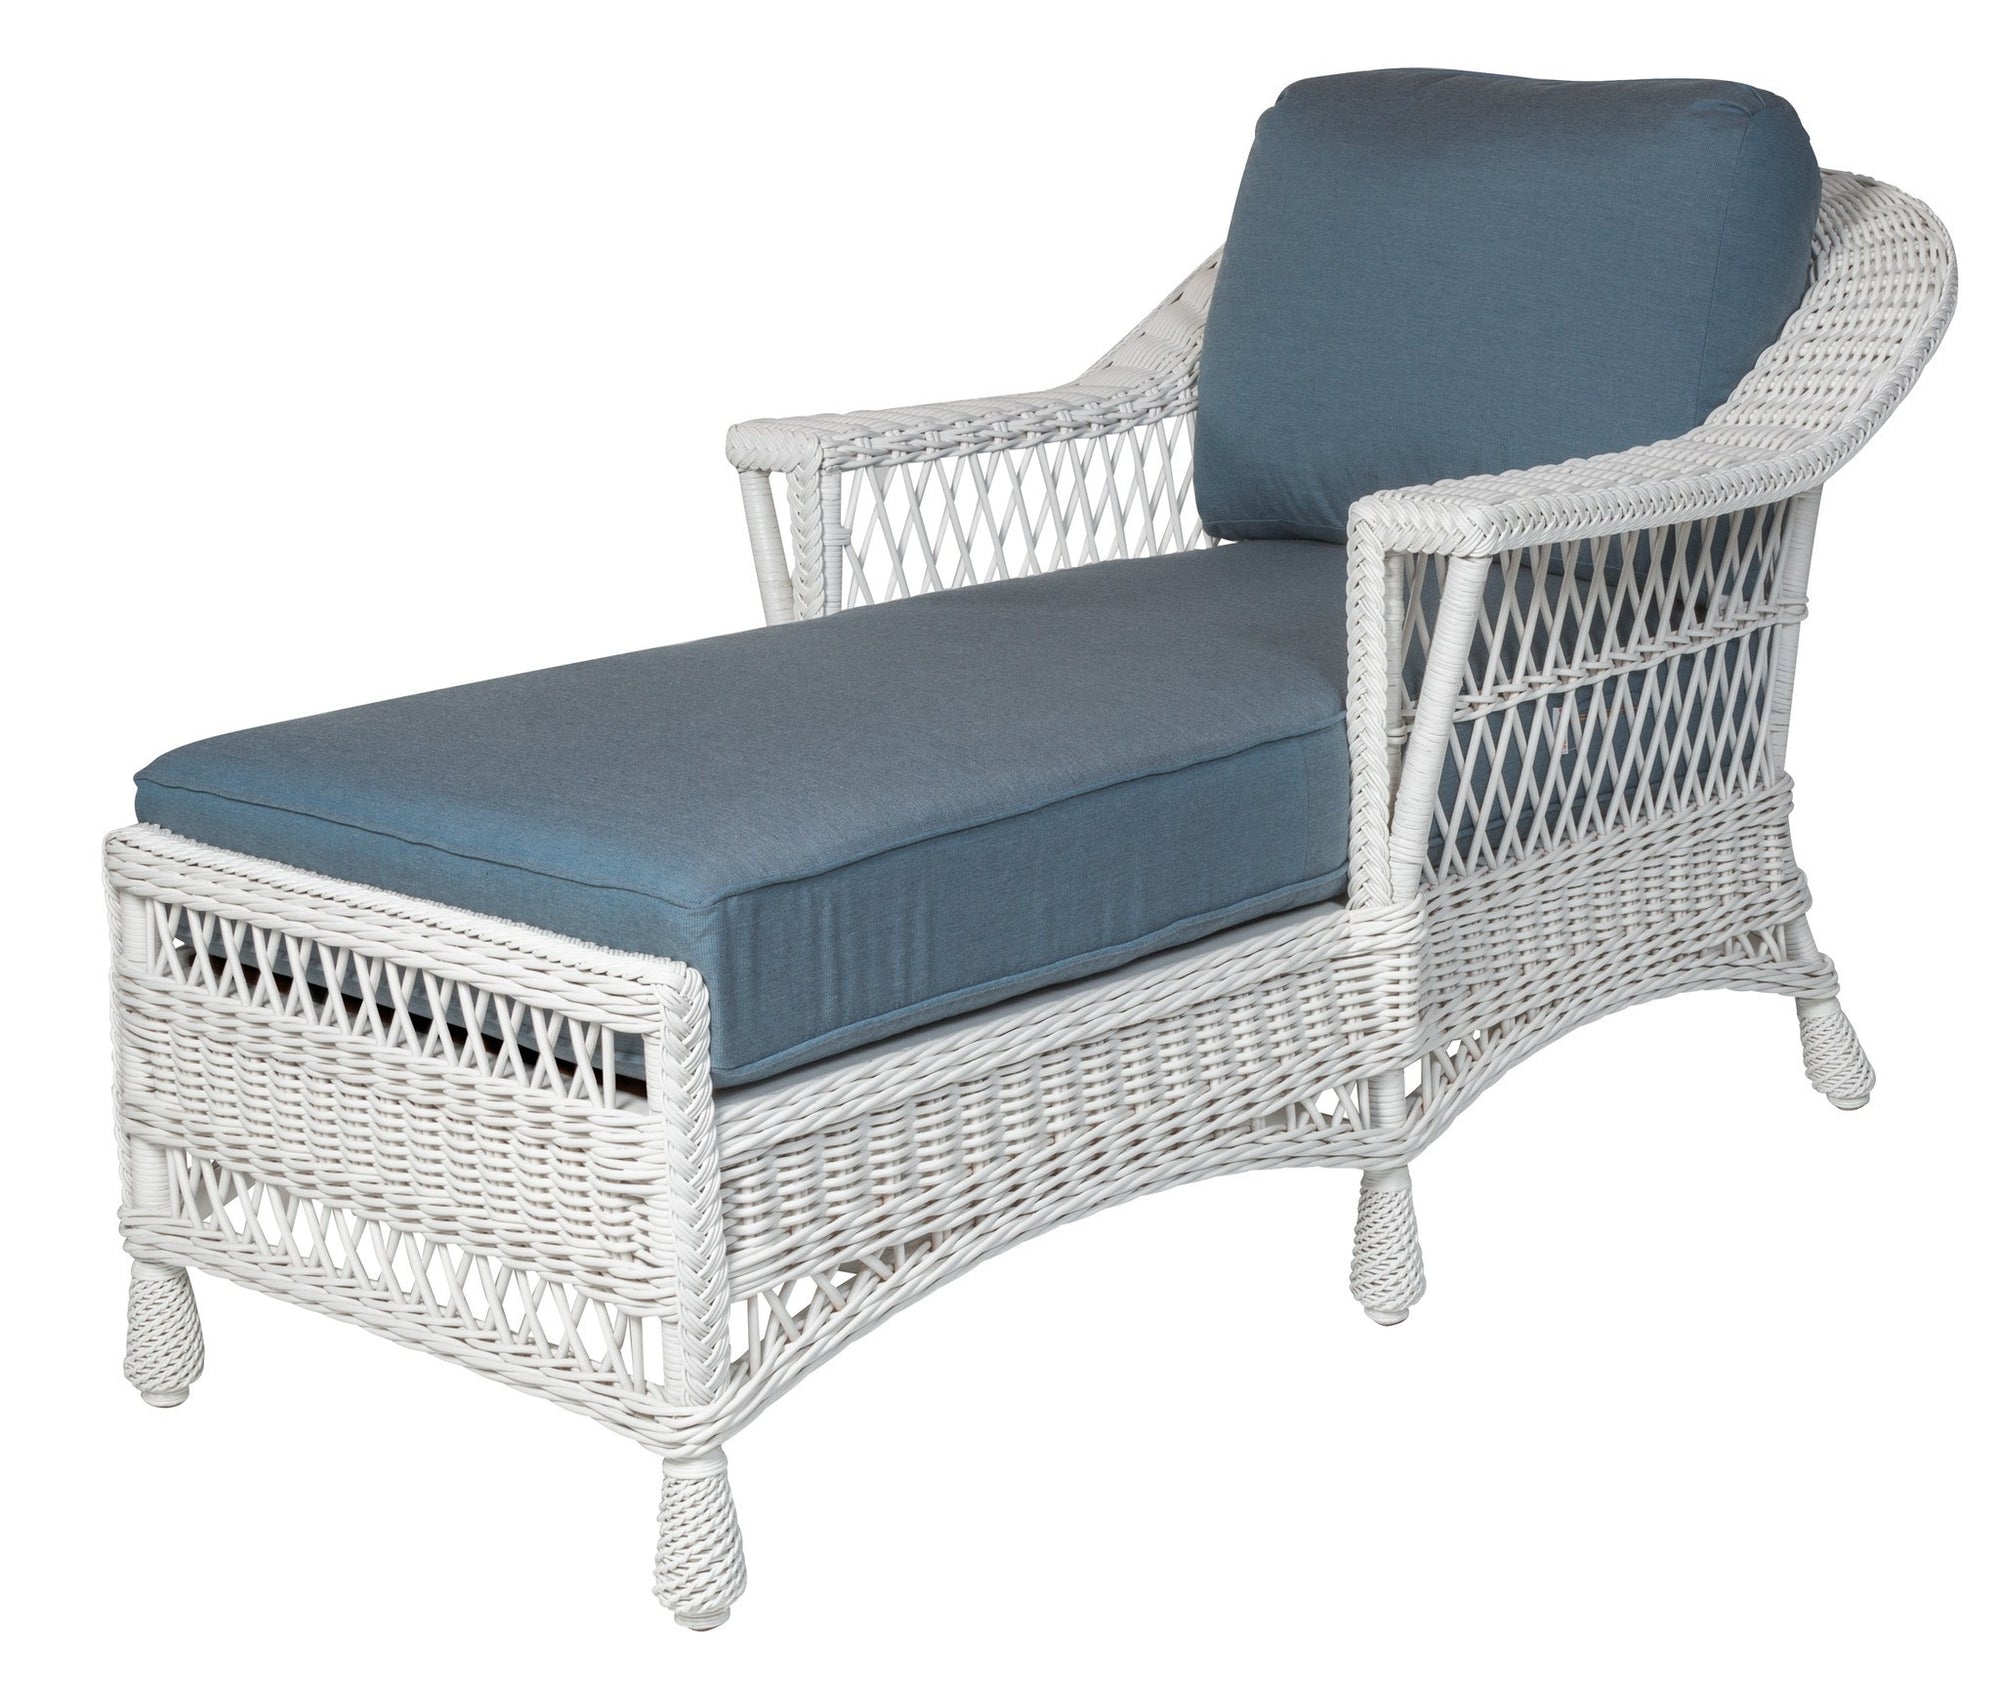 Designer Wicker & Rattan By Tribor Designer Wicker Bar Harbor Chaise Lounge Chair Lounge Chair - Rattan Imports